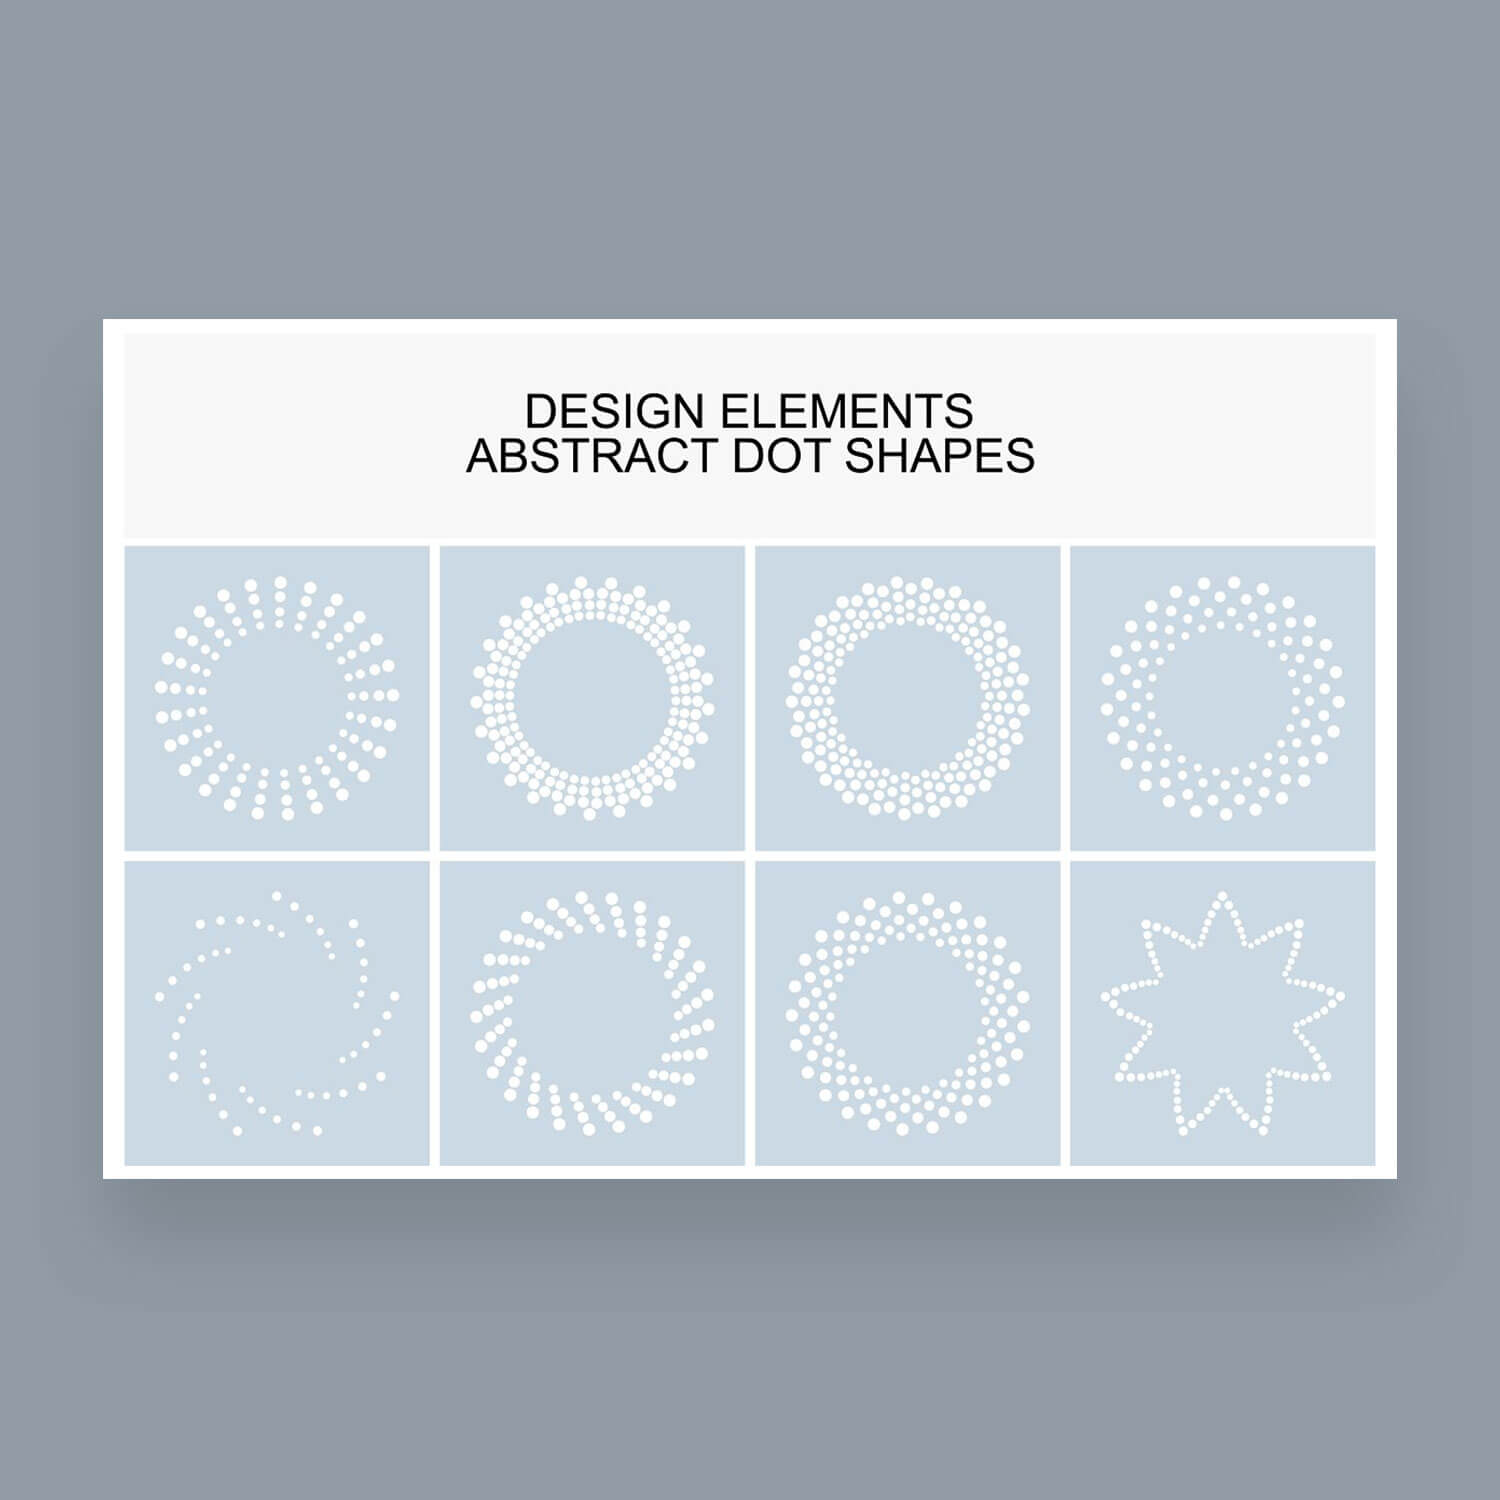 Design Elements Abstract Dot Shapes.